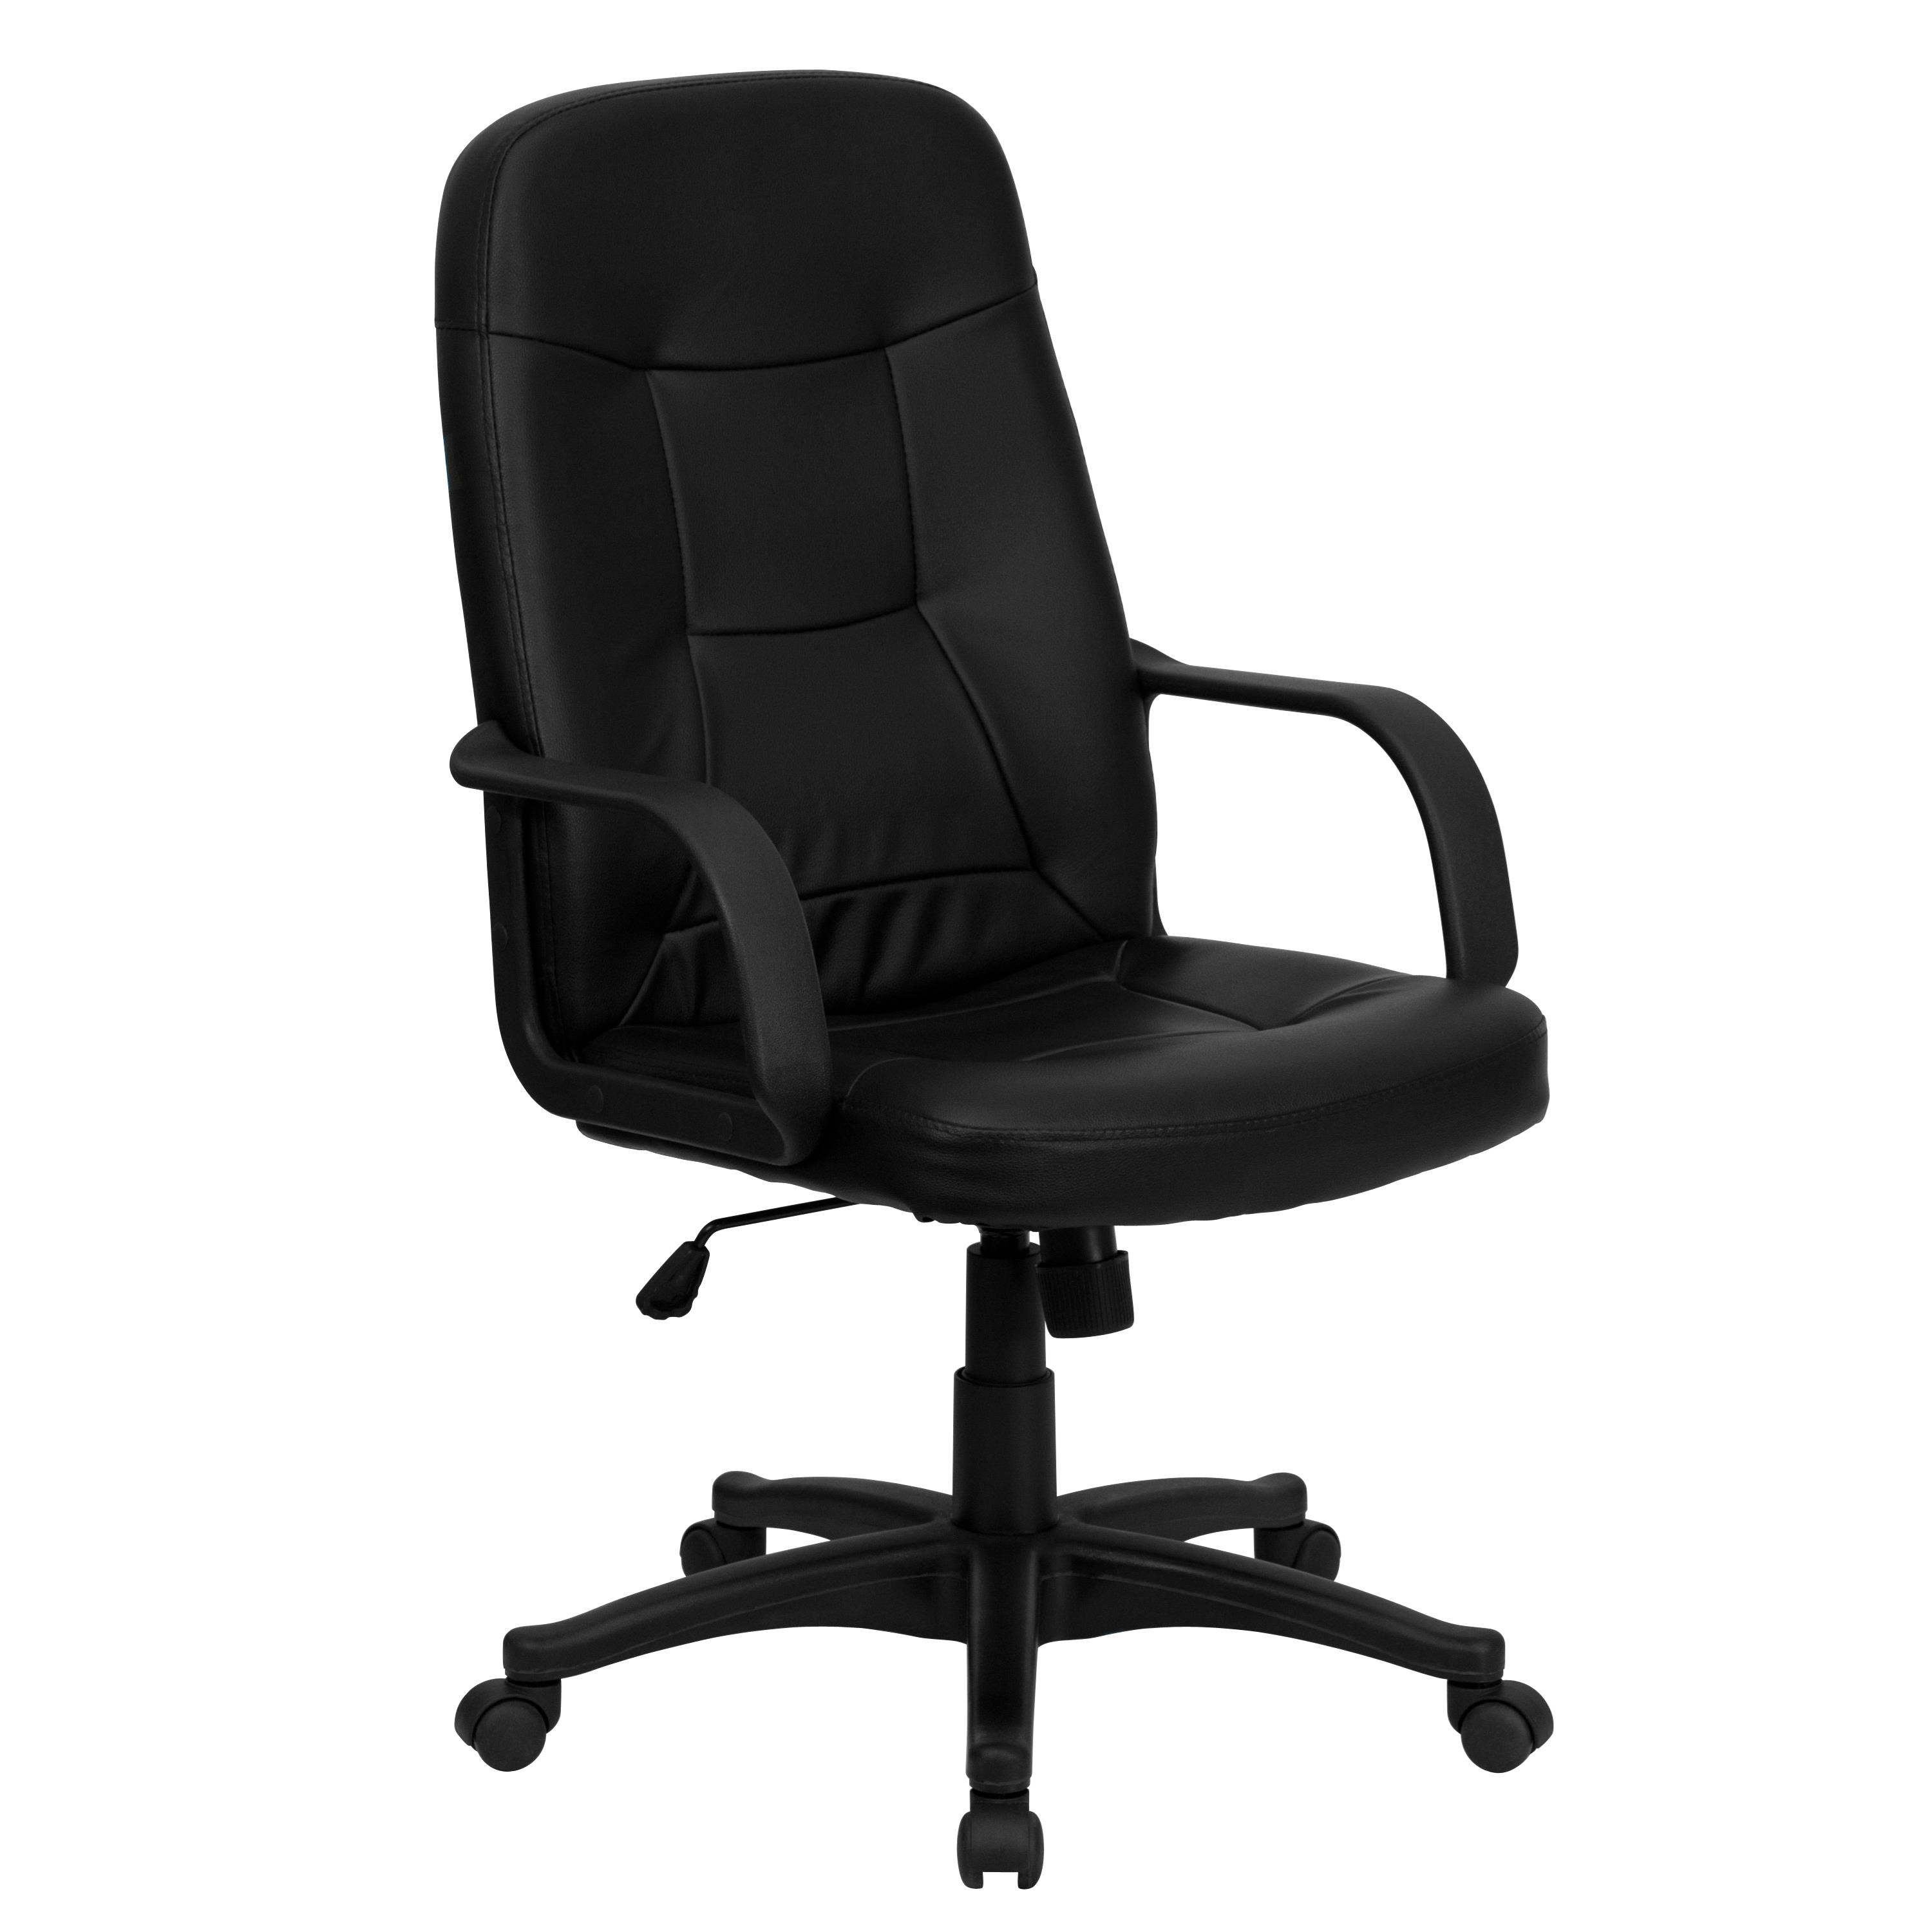 High Back Black Glove Vinyl Executive Swivel Office Chair With